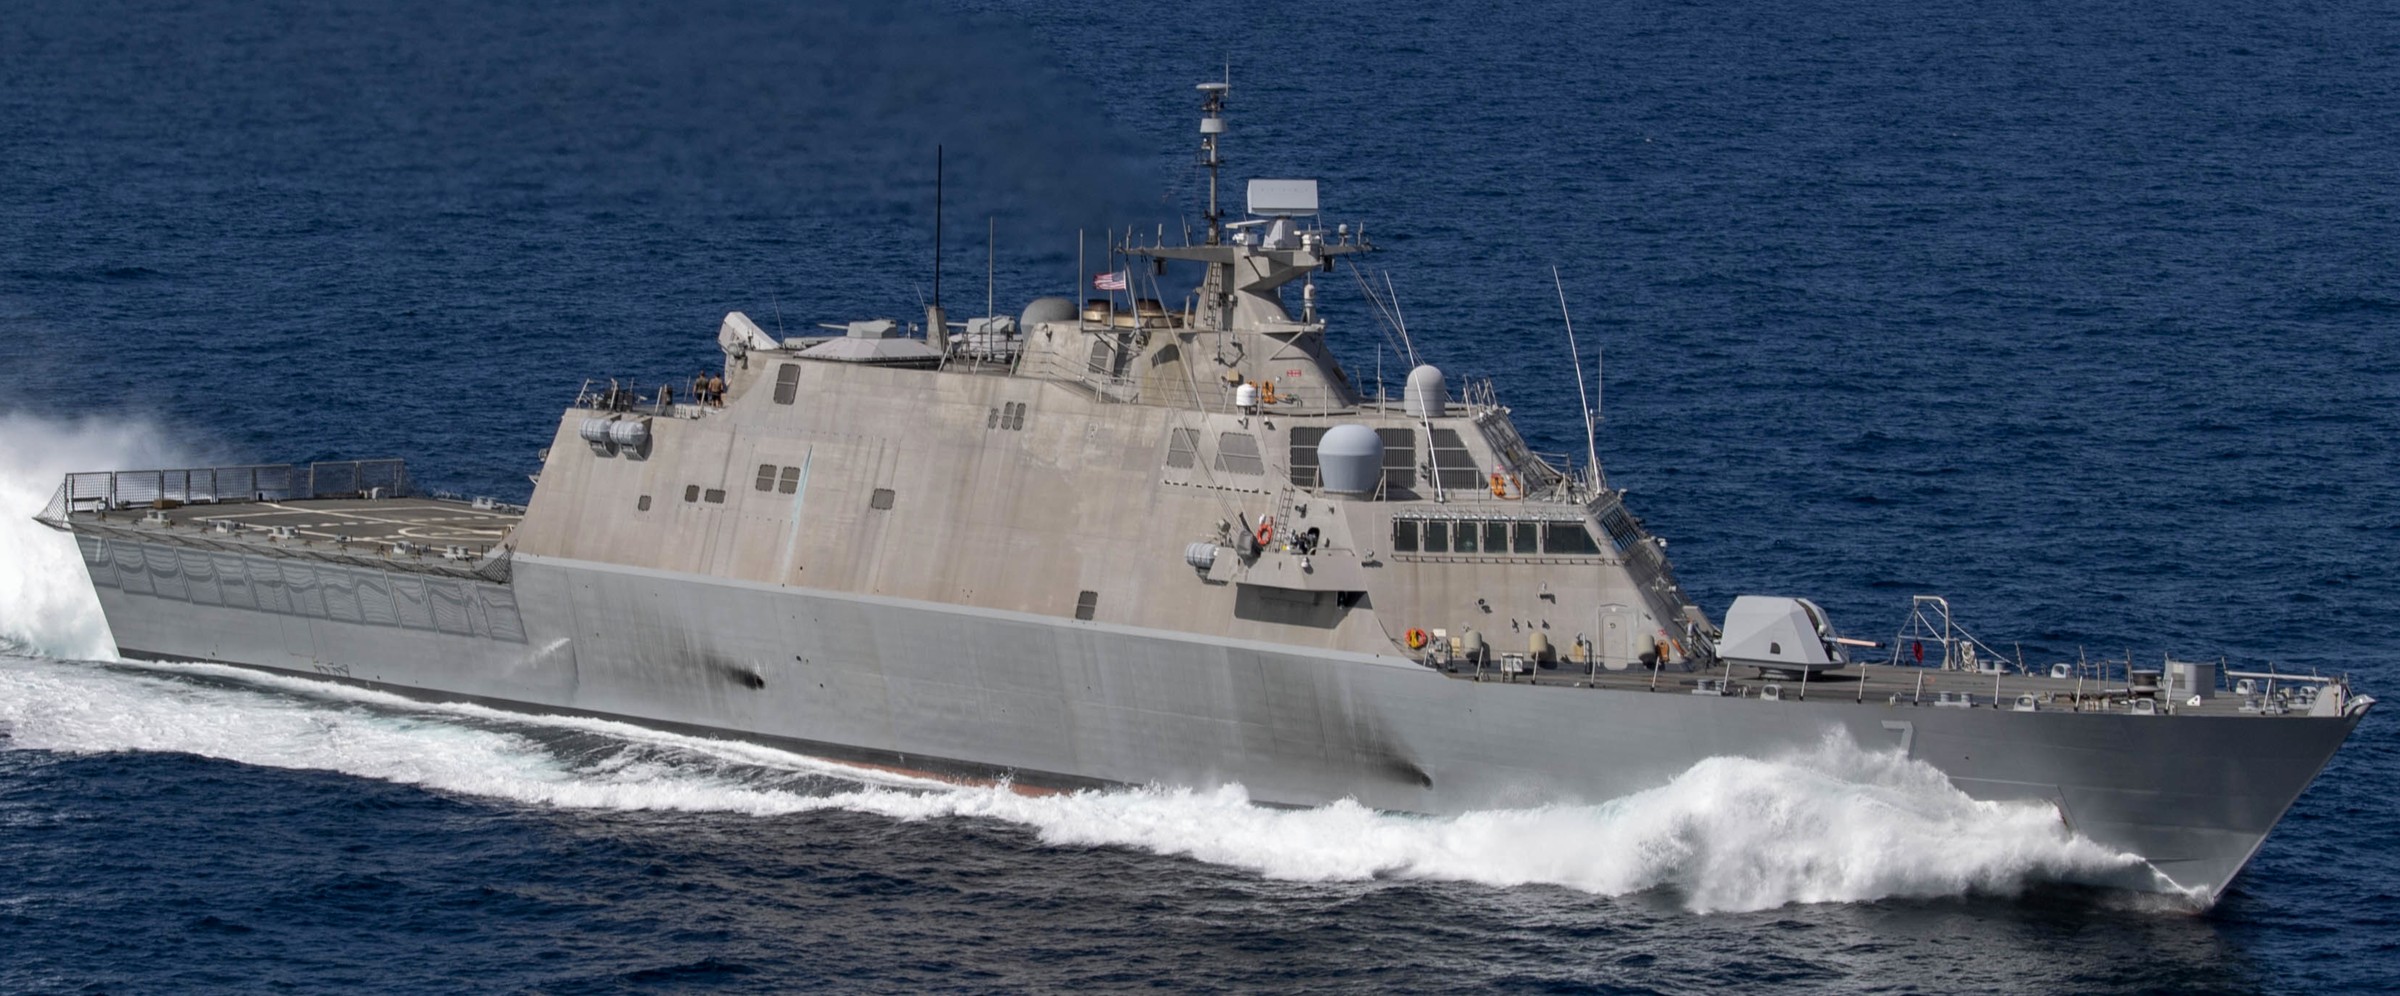 lcs-7 uss detroit freedom class littoral combat ship us navy 31